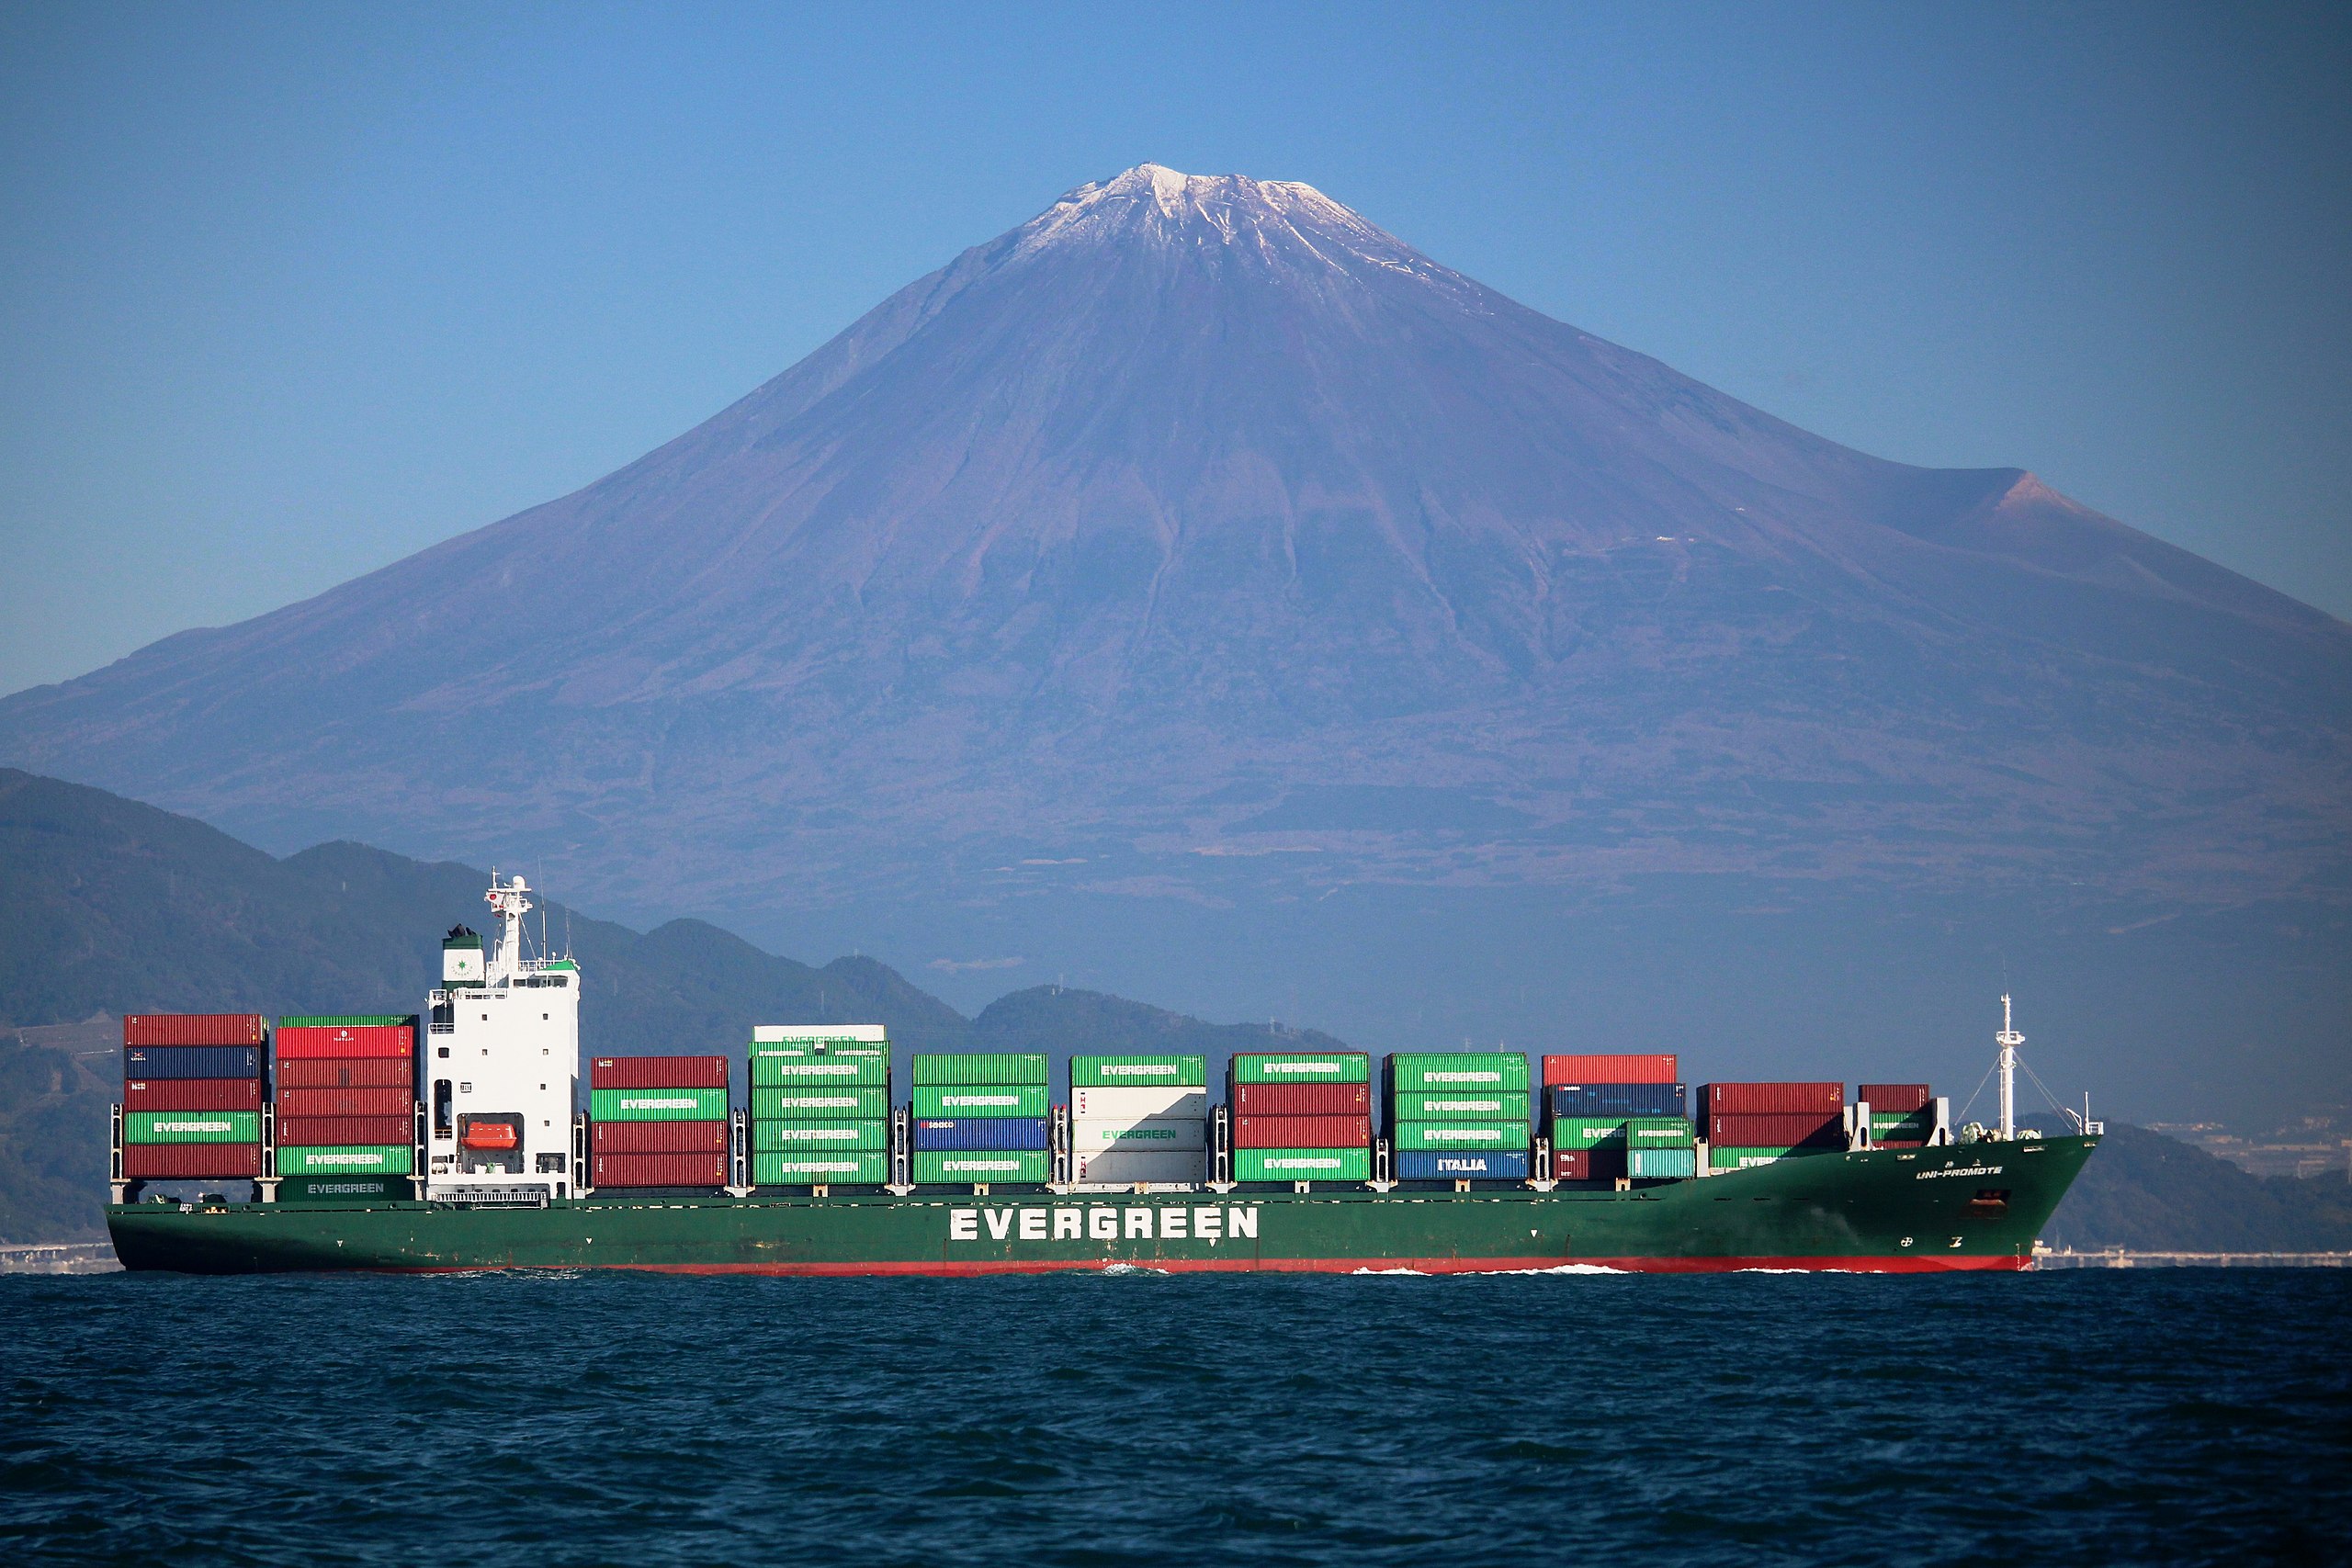 <p>Evergreen’s A-type vessels are known as the largest of their kind in the world, carrying massive amounts of weight seamlessly through the sea. The Ever Apex is no different than its siblings, standing as a testament to human engineering.</p>